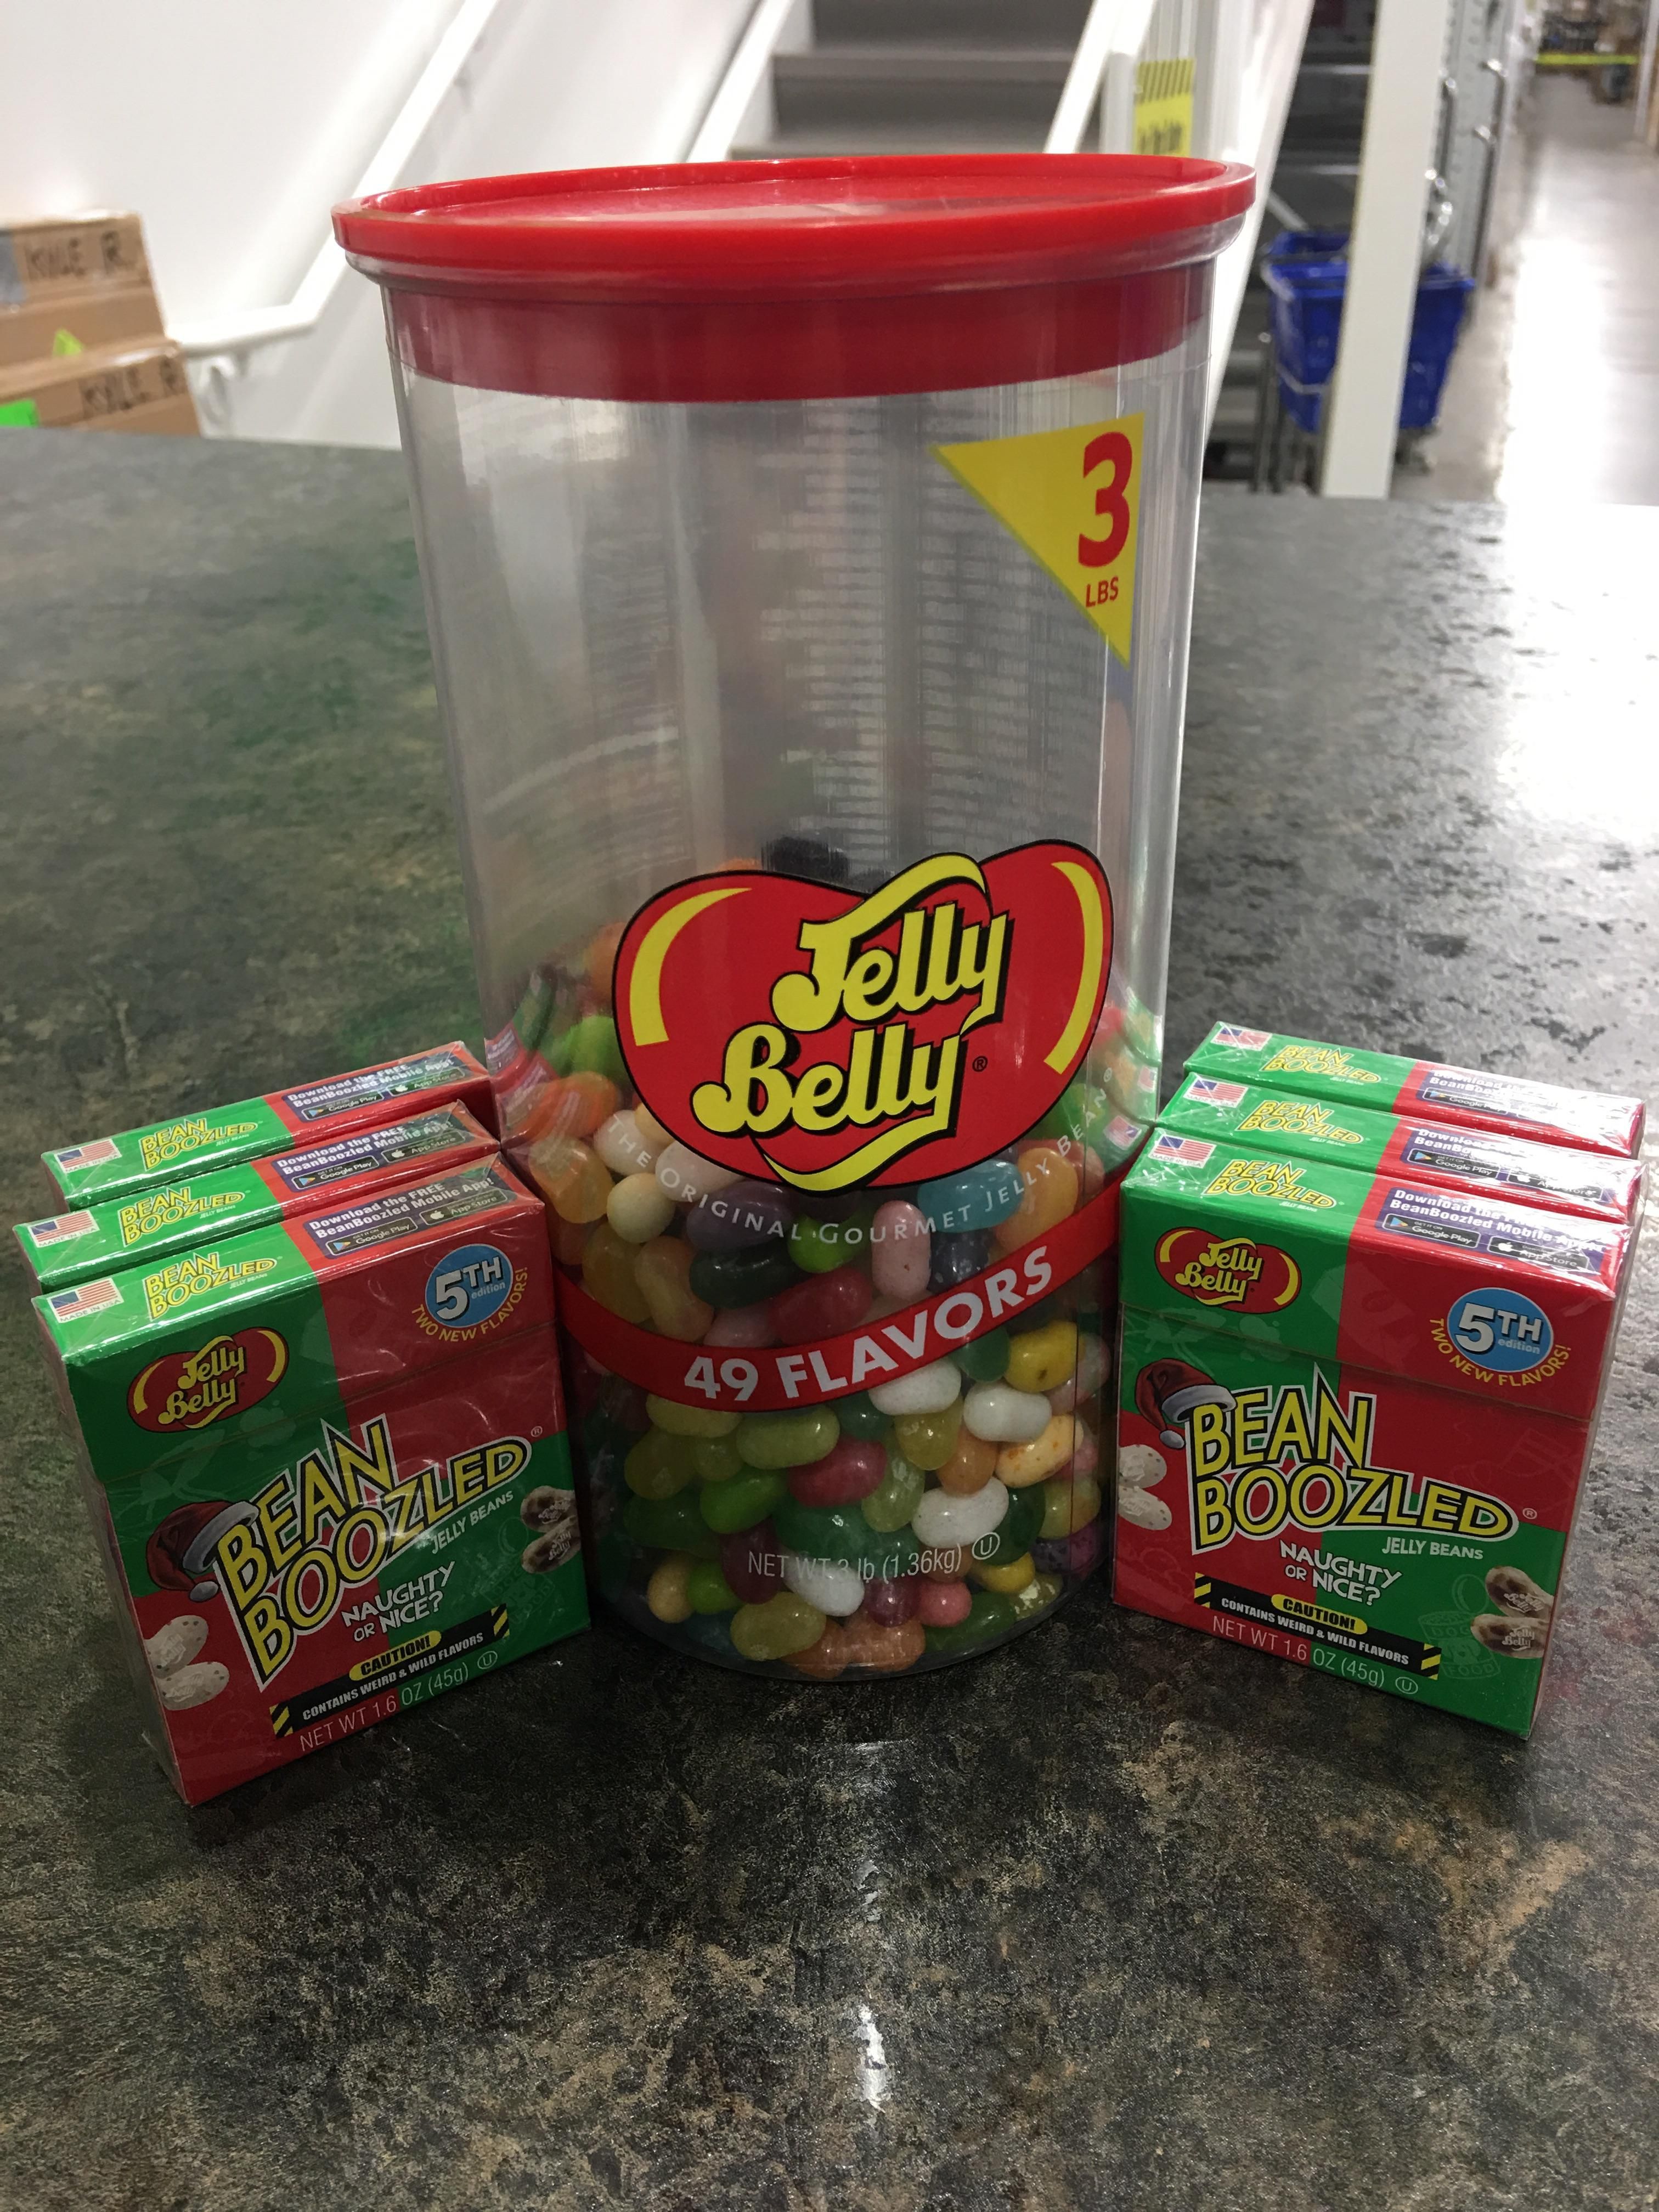 To everyone at work that has been eating my jellybeans..now the fun begins.